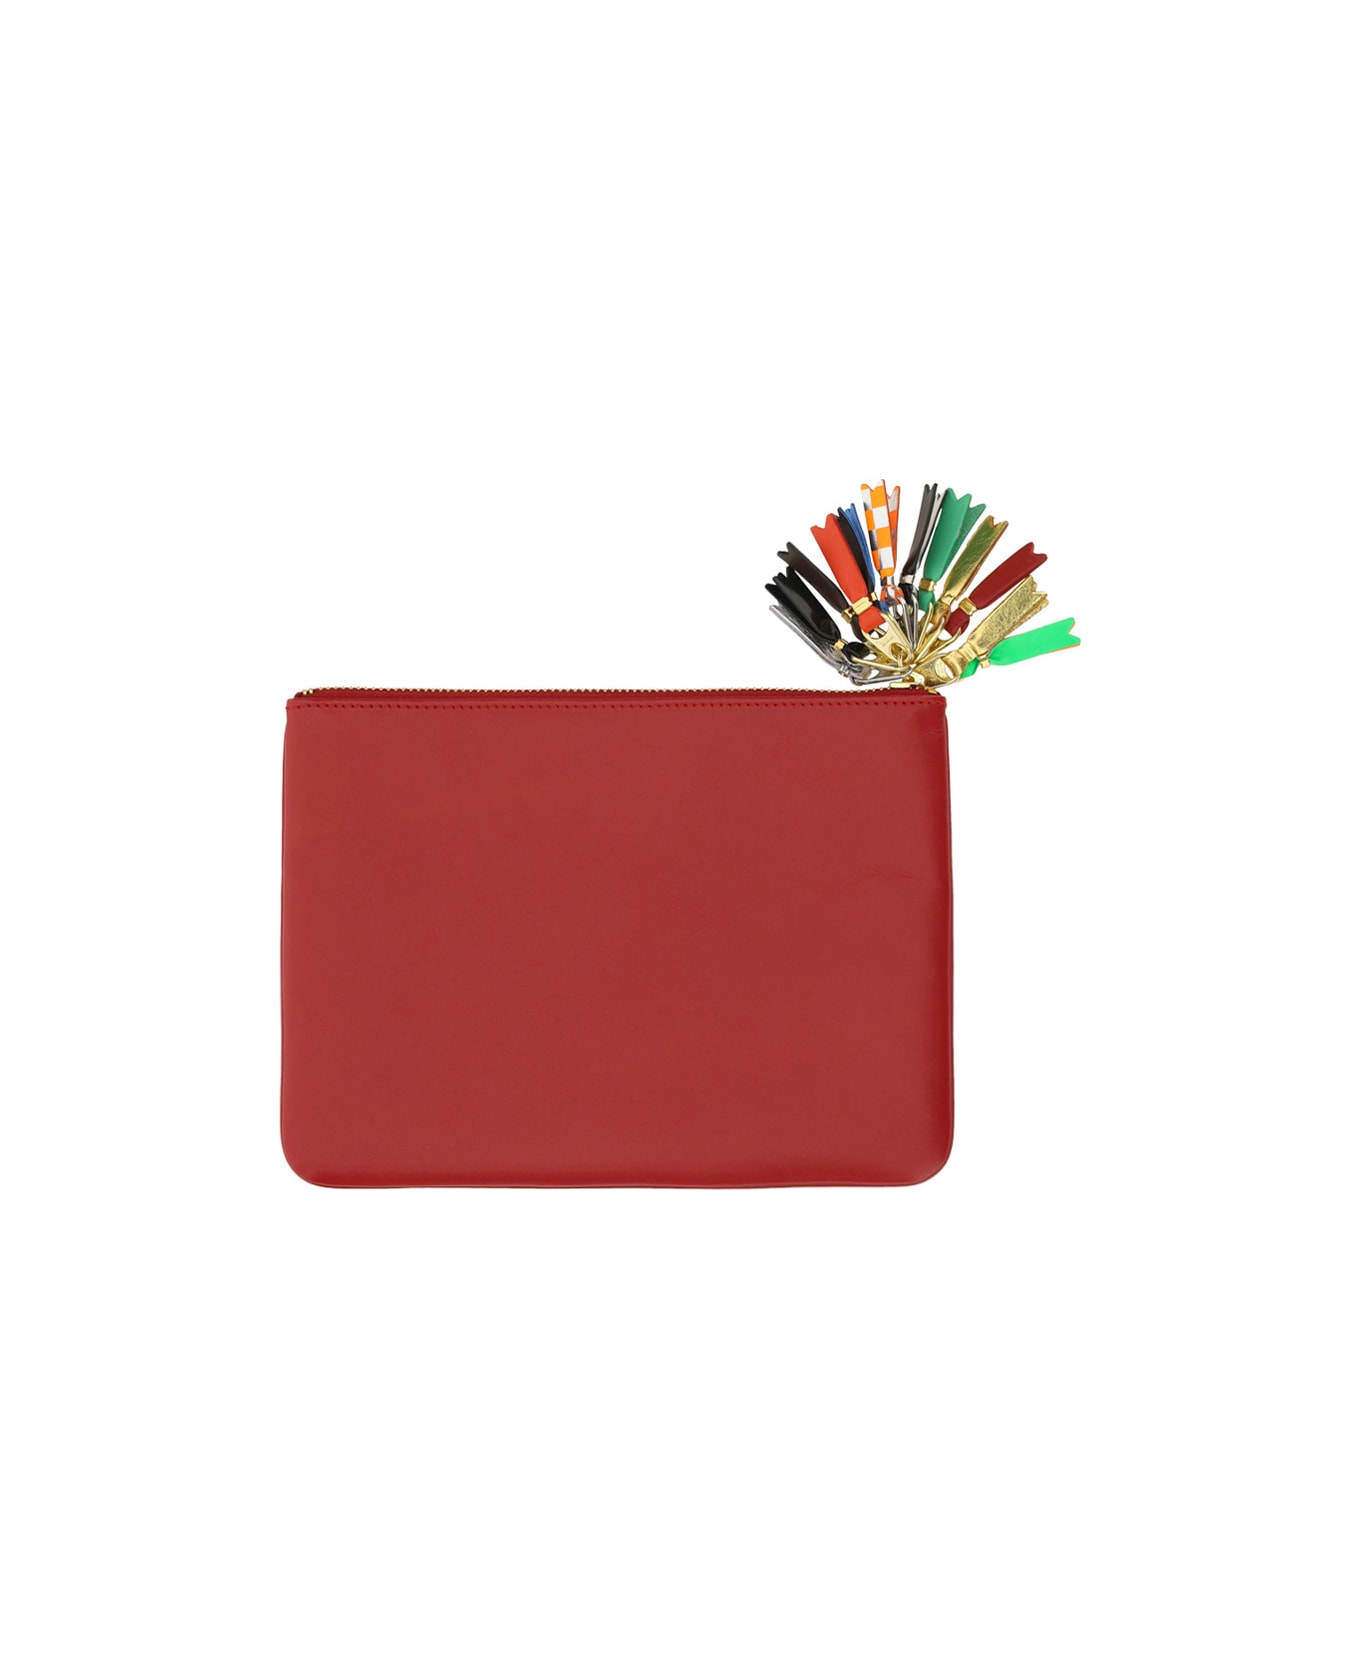 We partner with Italys best luxury retailers and work together with them to provide you Wallet Coin Purse - Red